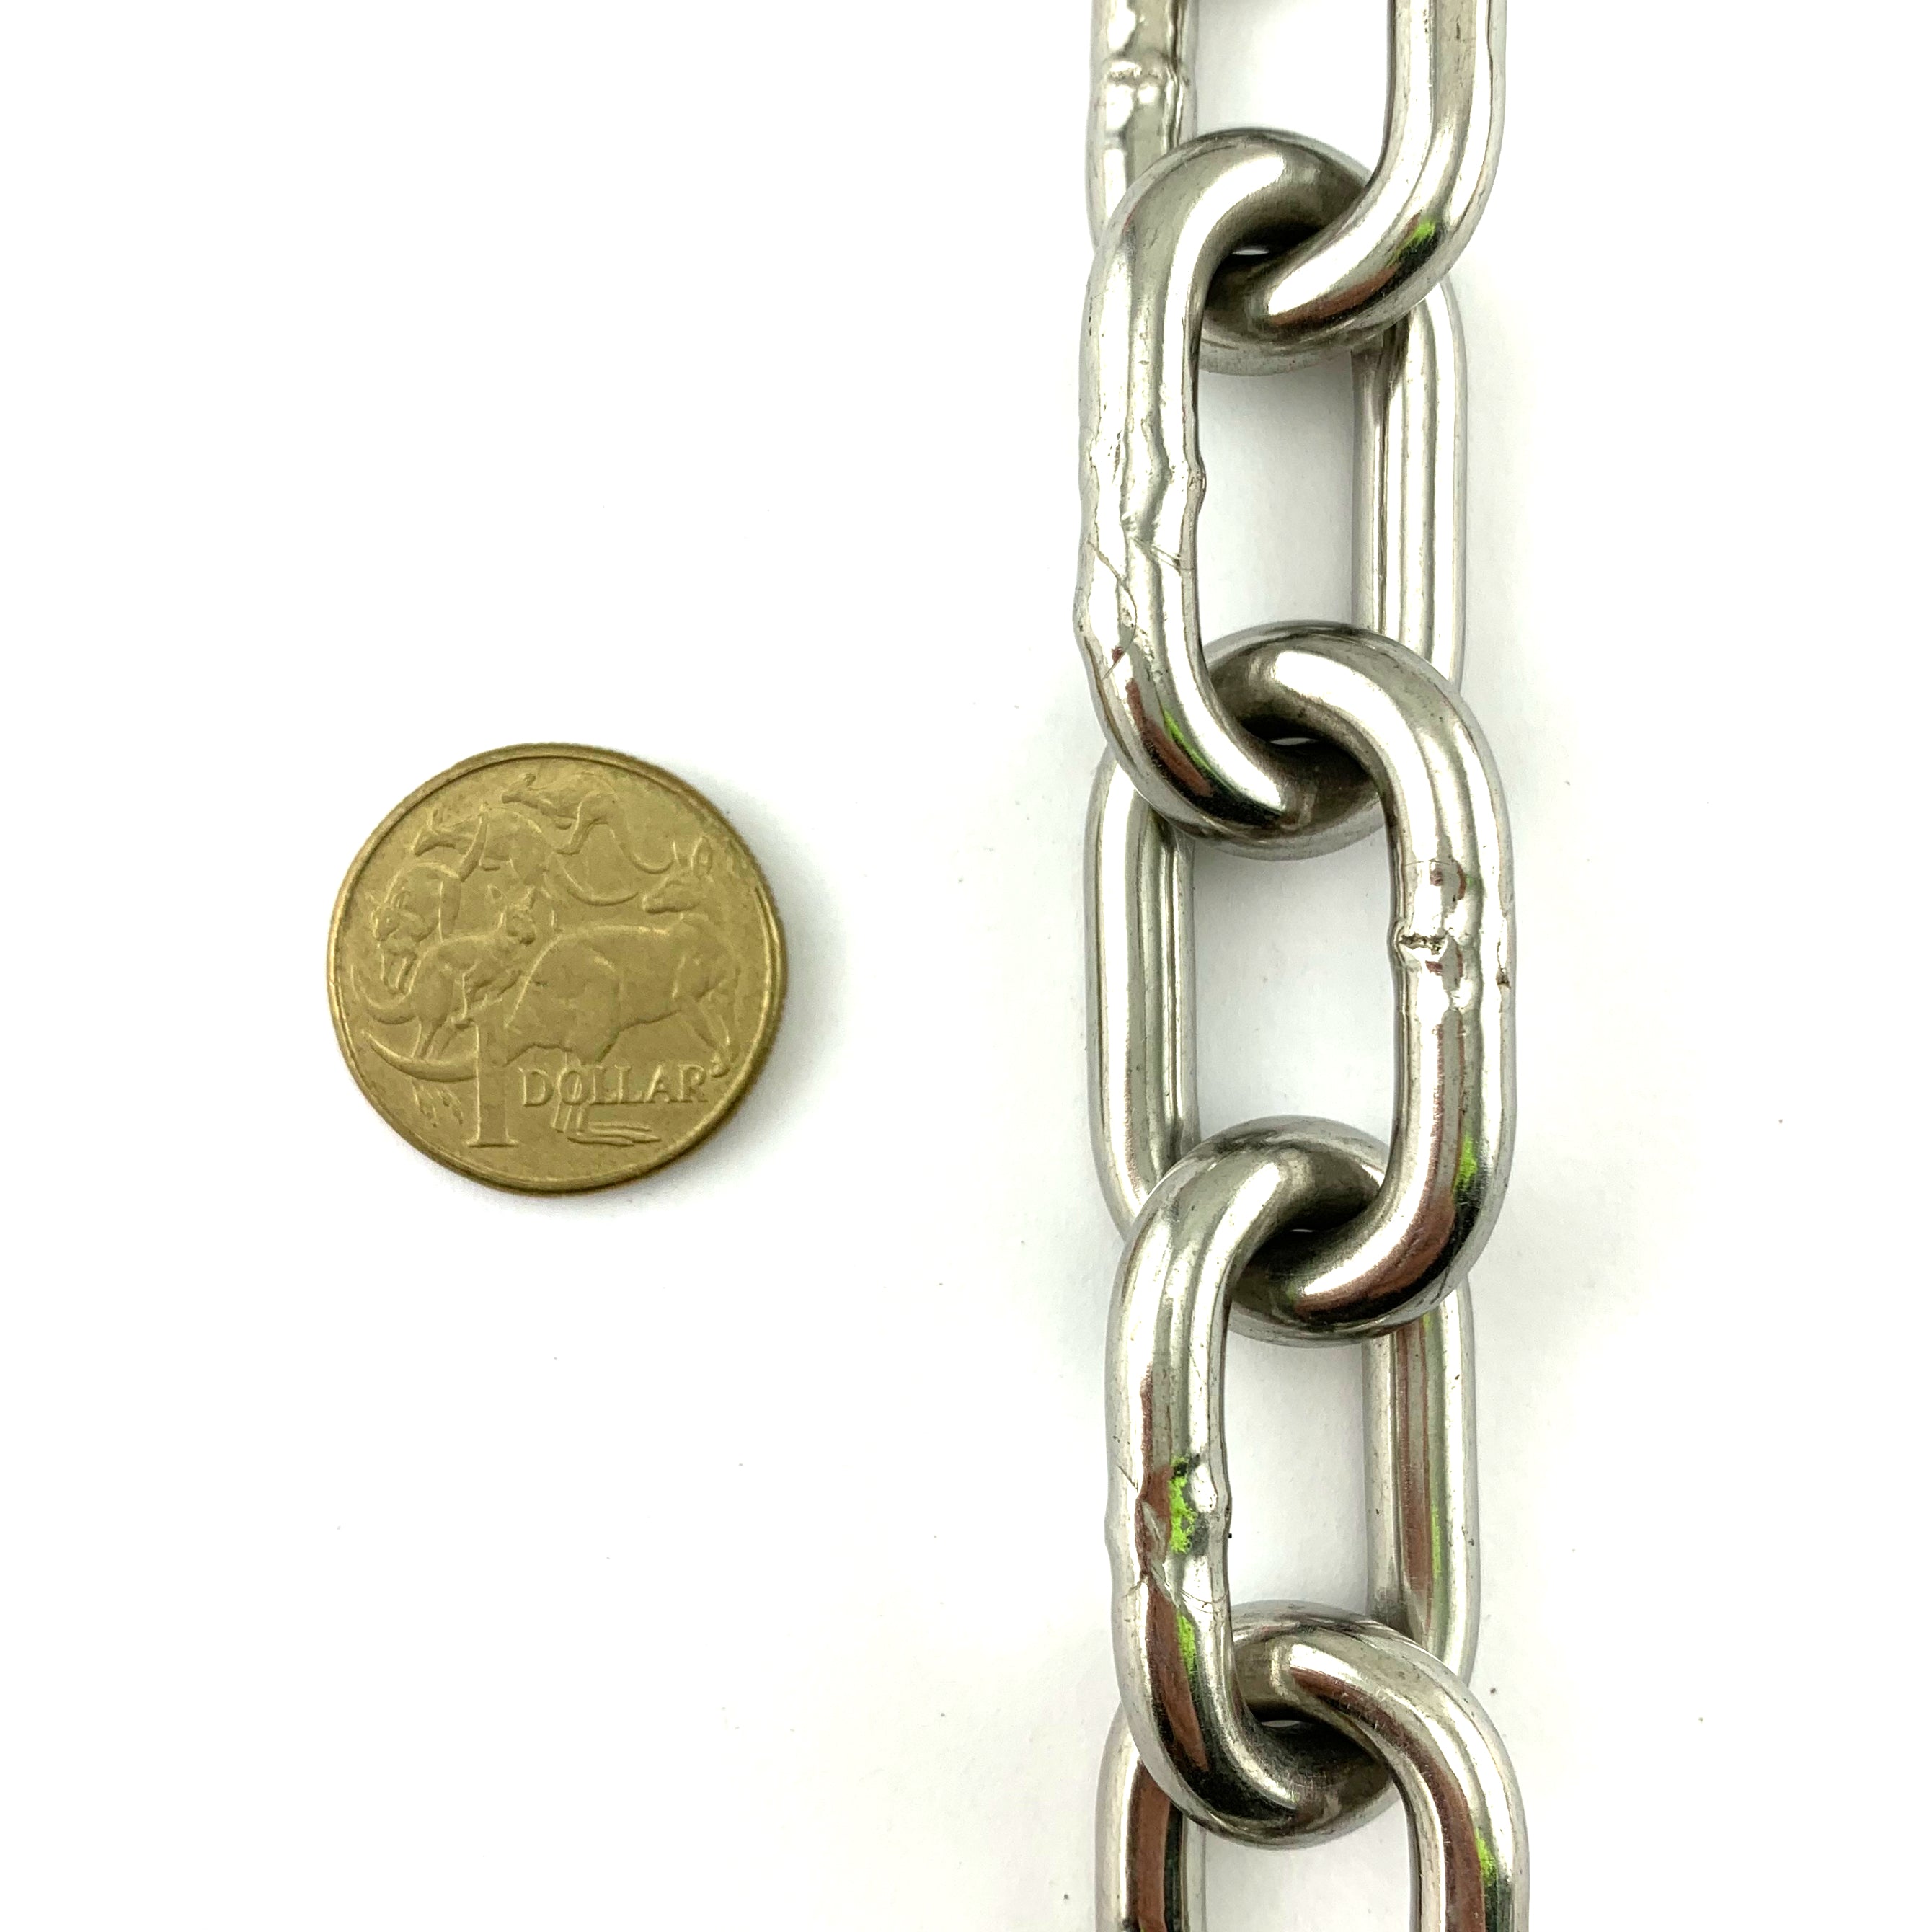 6mm stainless steel welded link chain in a 25kg bucket, with 35.8 metres of chain. Melbourne, Australia.